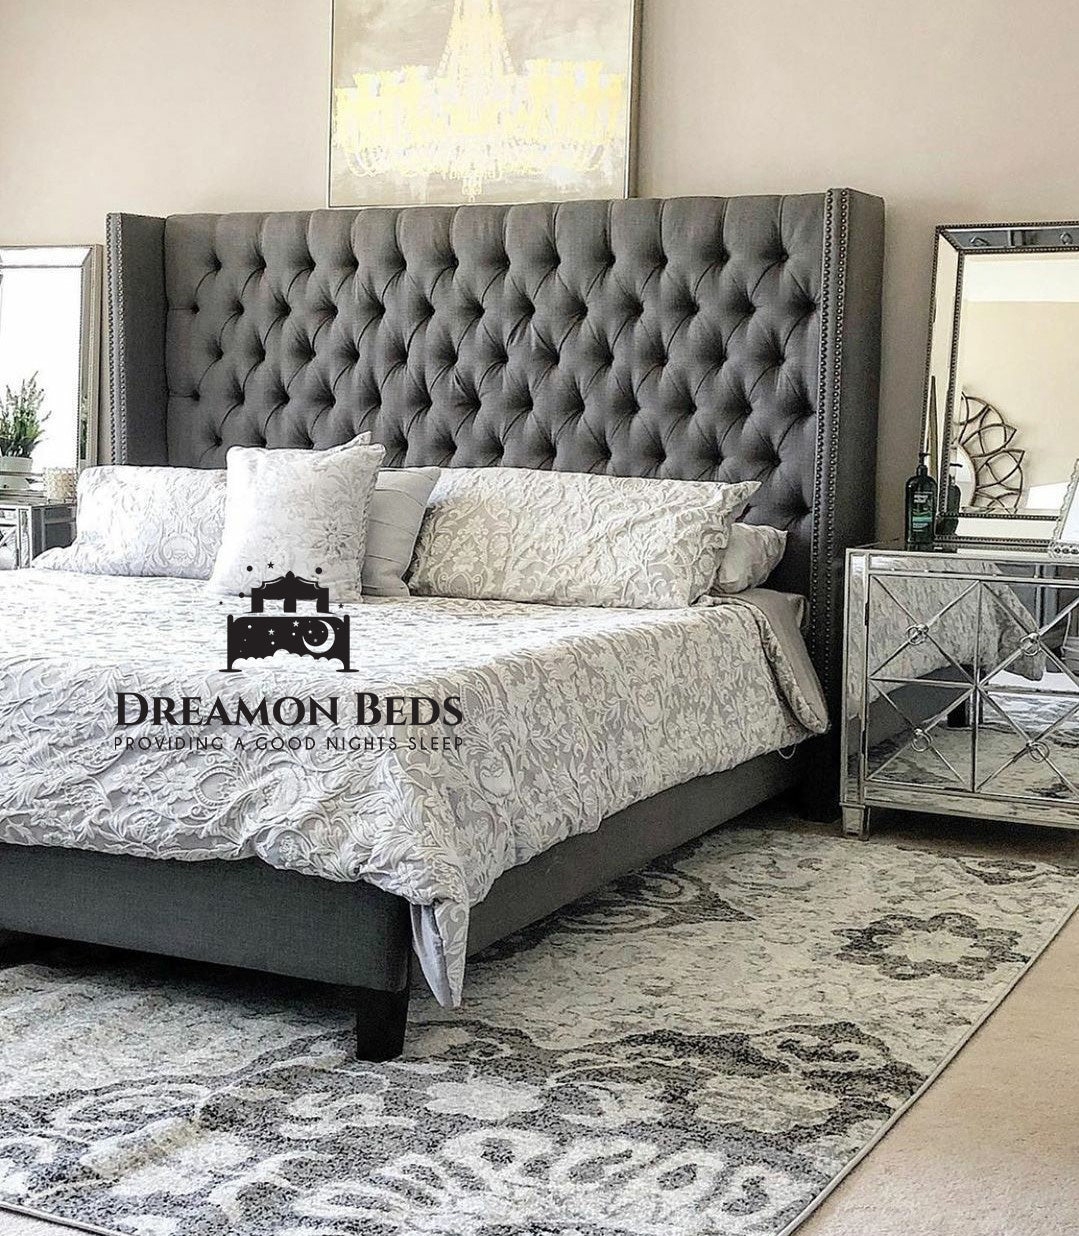 Monaco Wingback Bed Frame Available With Divan Or Ottoman Storage – Choice Of 25 Colours With Varying Materials – Dreamon Beds